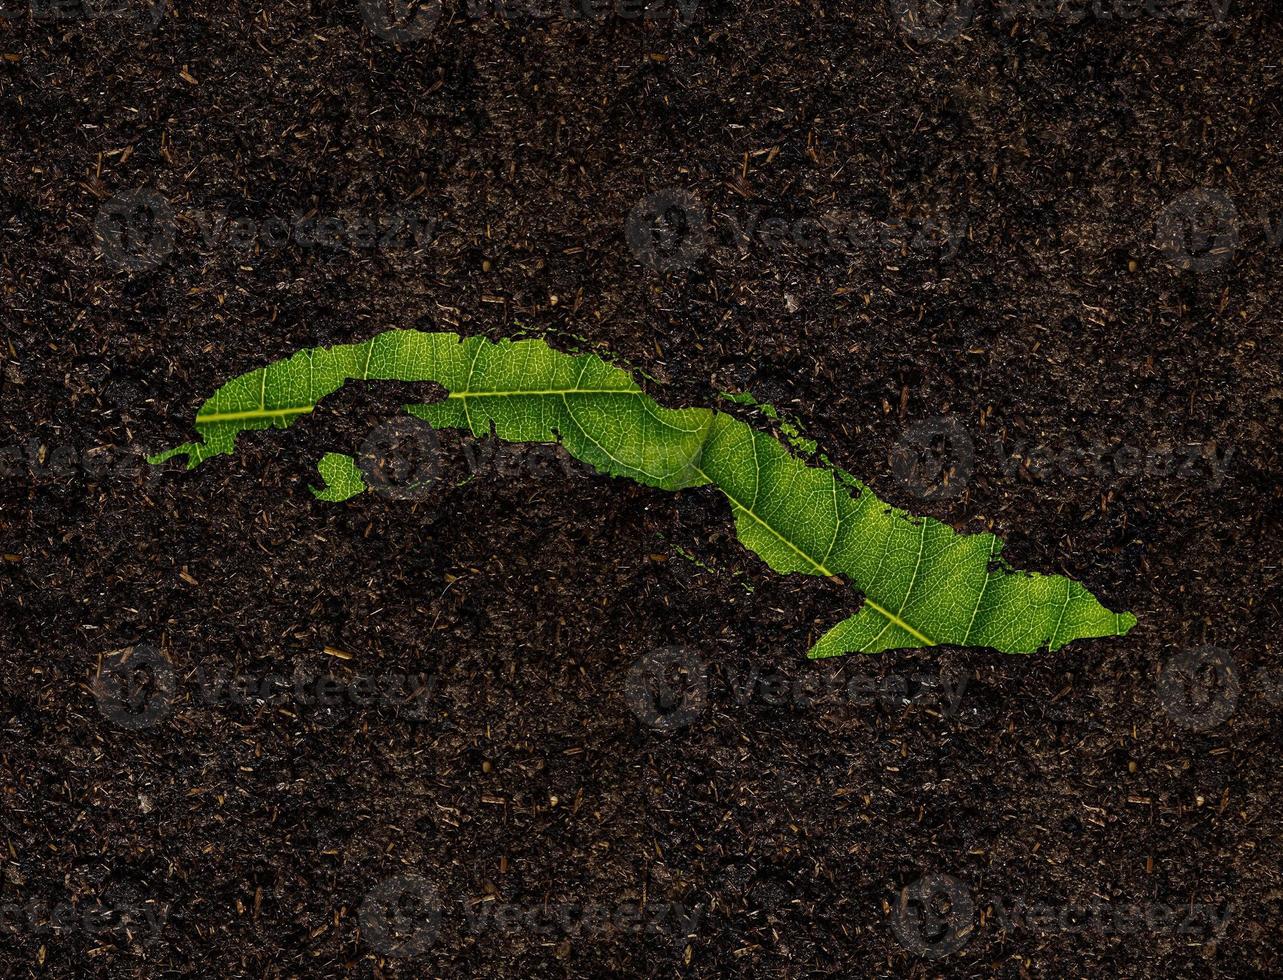 Cuba map made of green leaves on soil background ecology concept photo